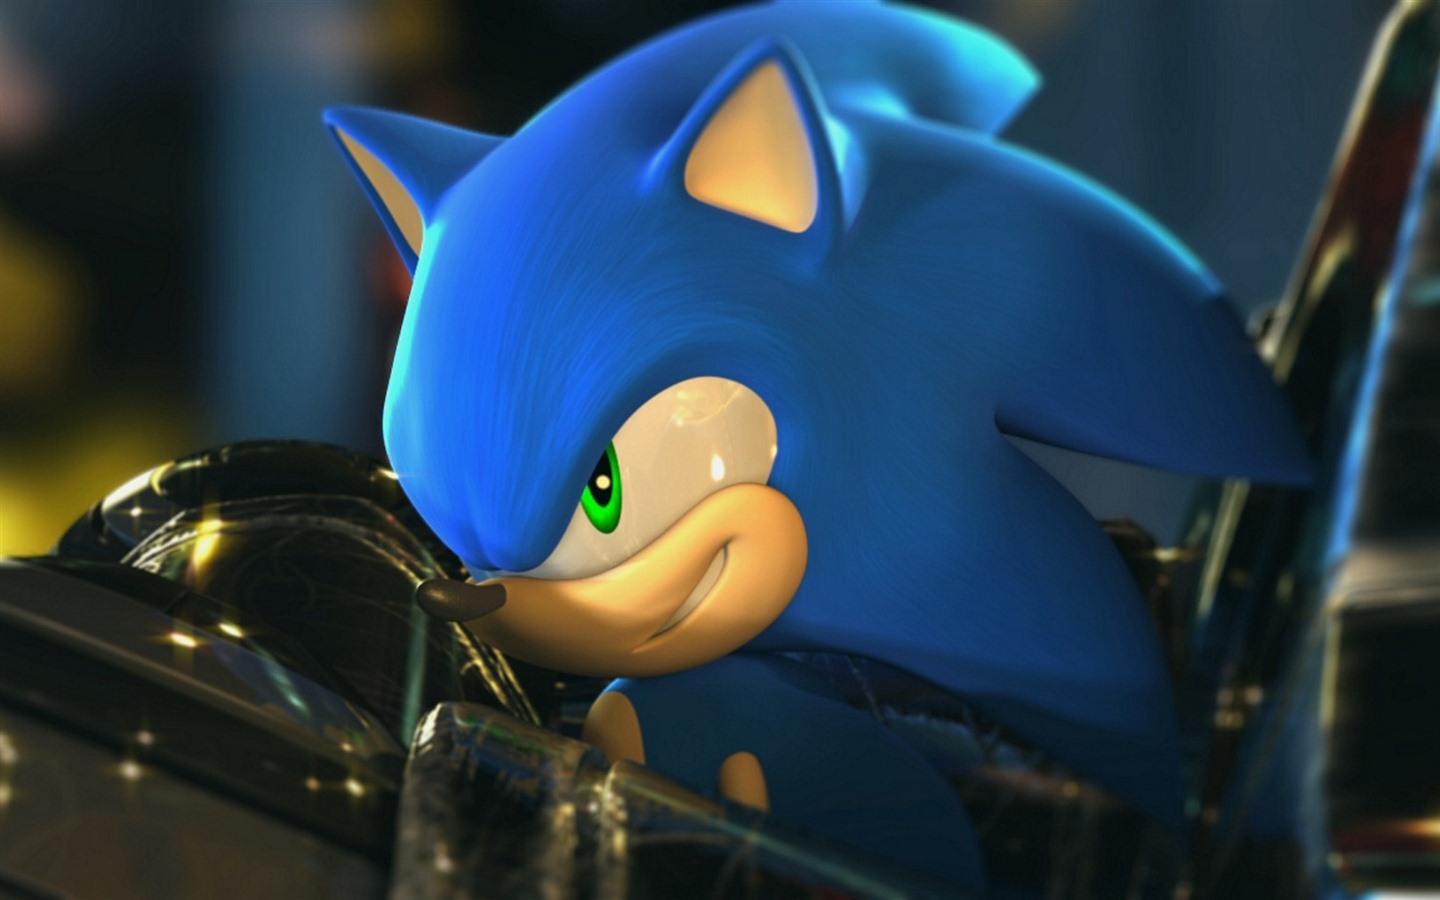 Sonic HD wallpapers #8 - 1440x900